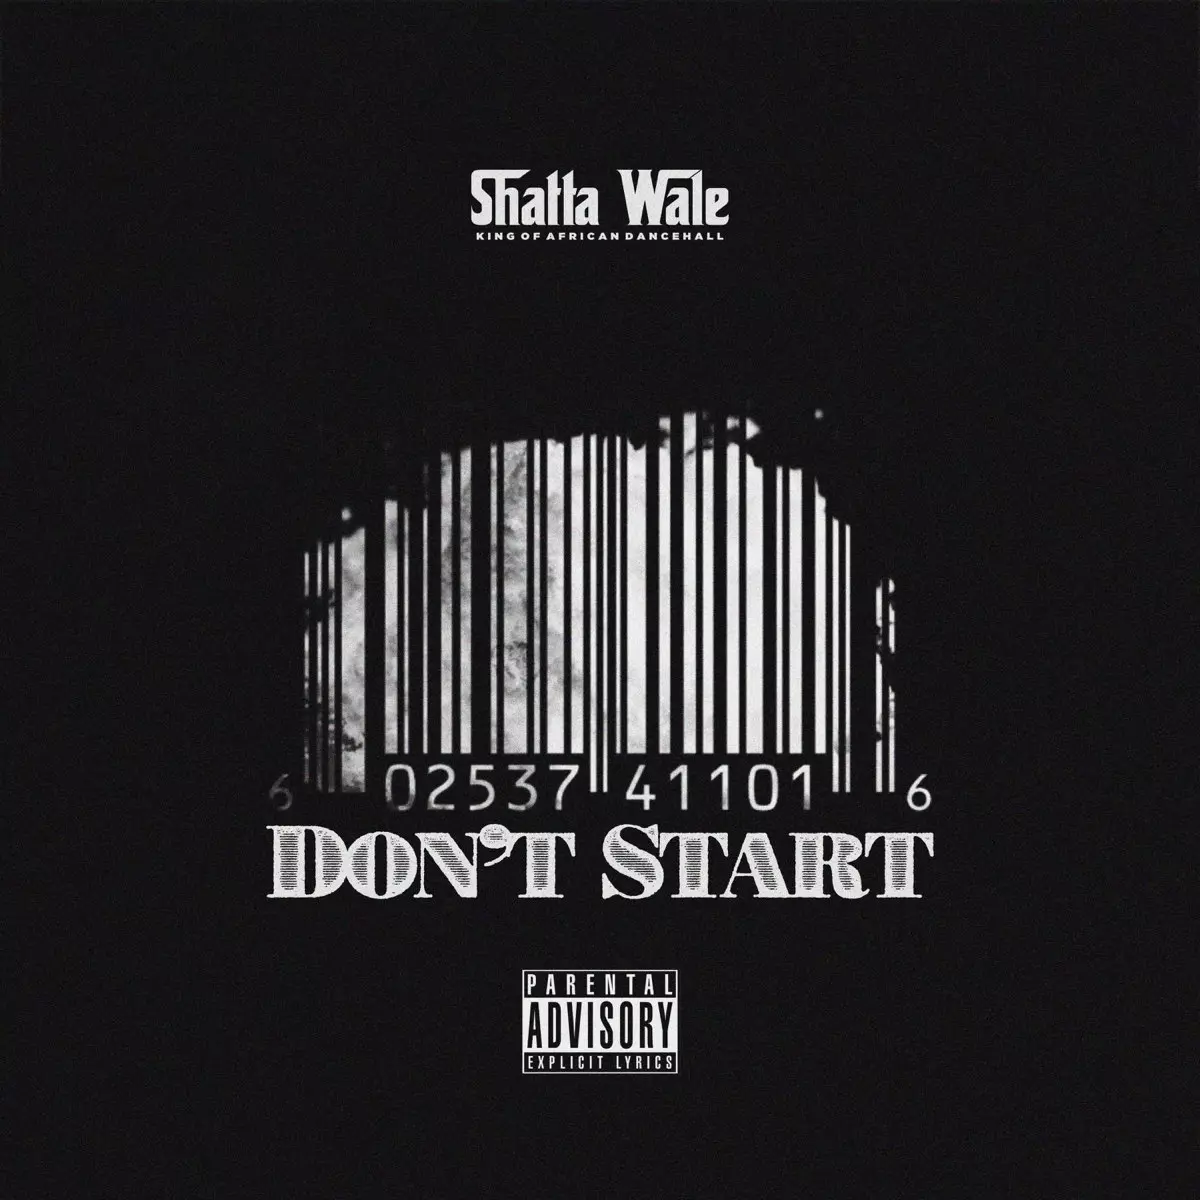 Dont Start - Single by Shatta Wale on Apple Music